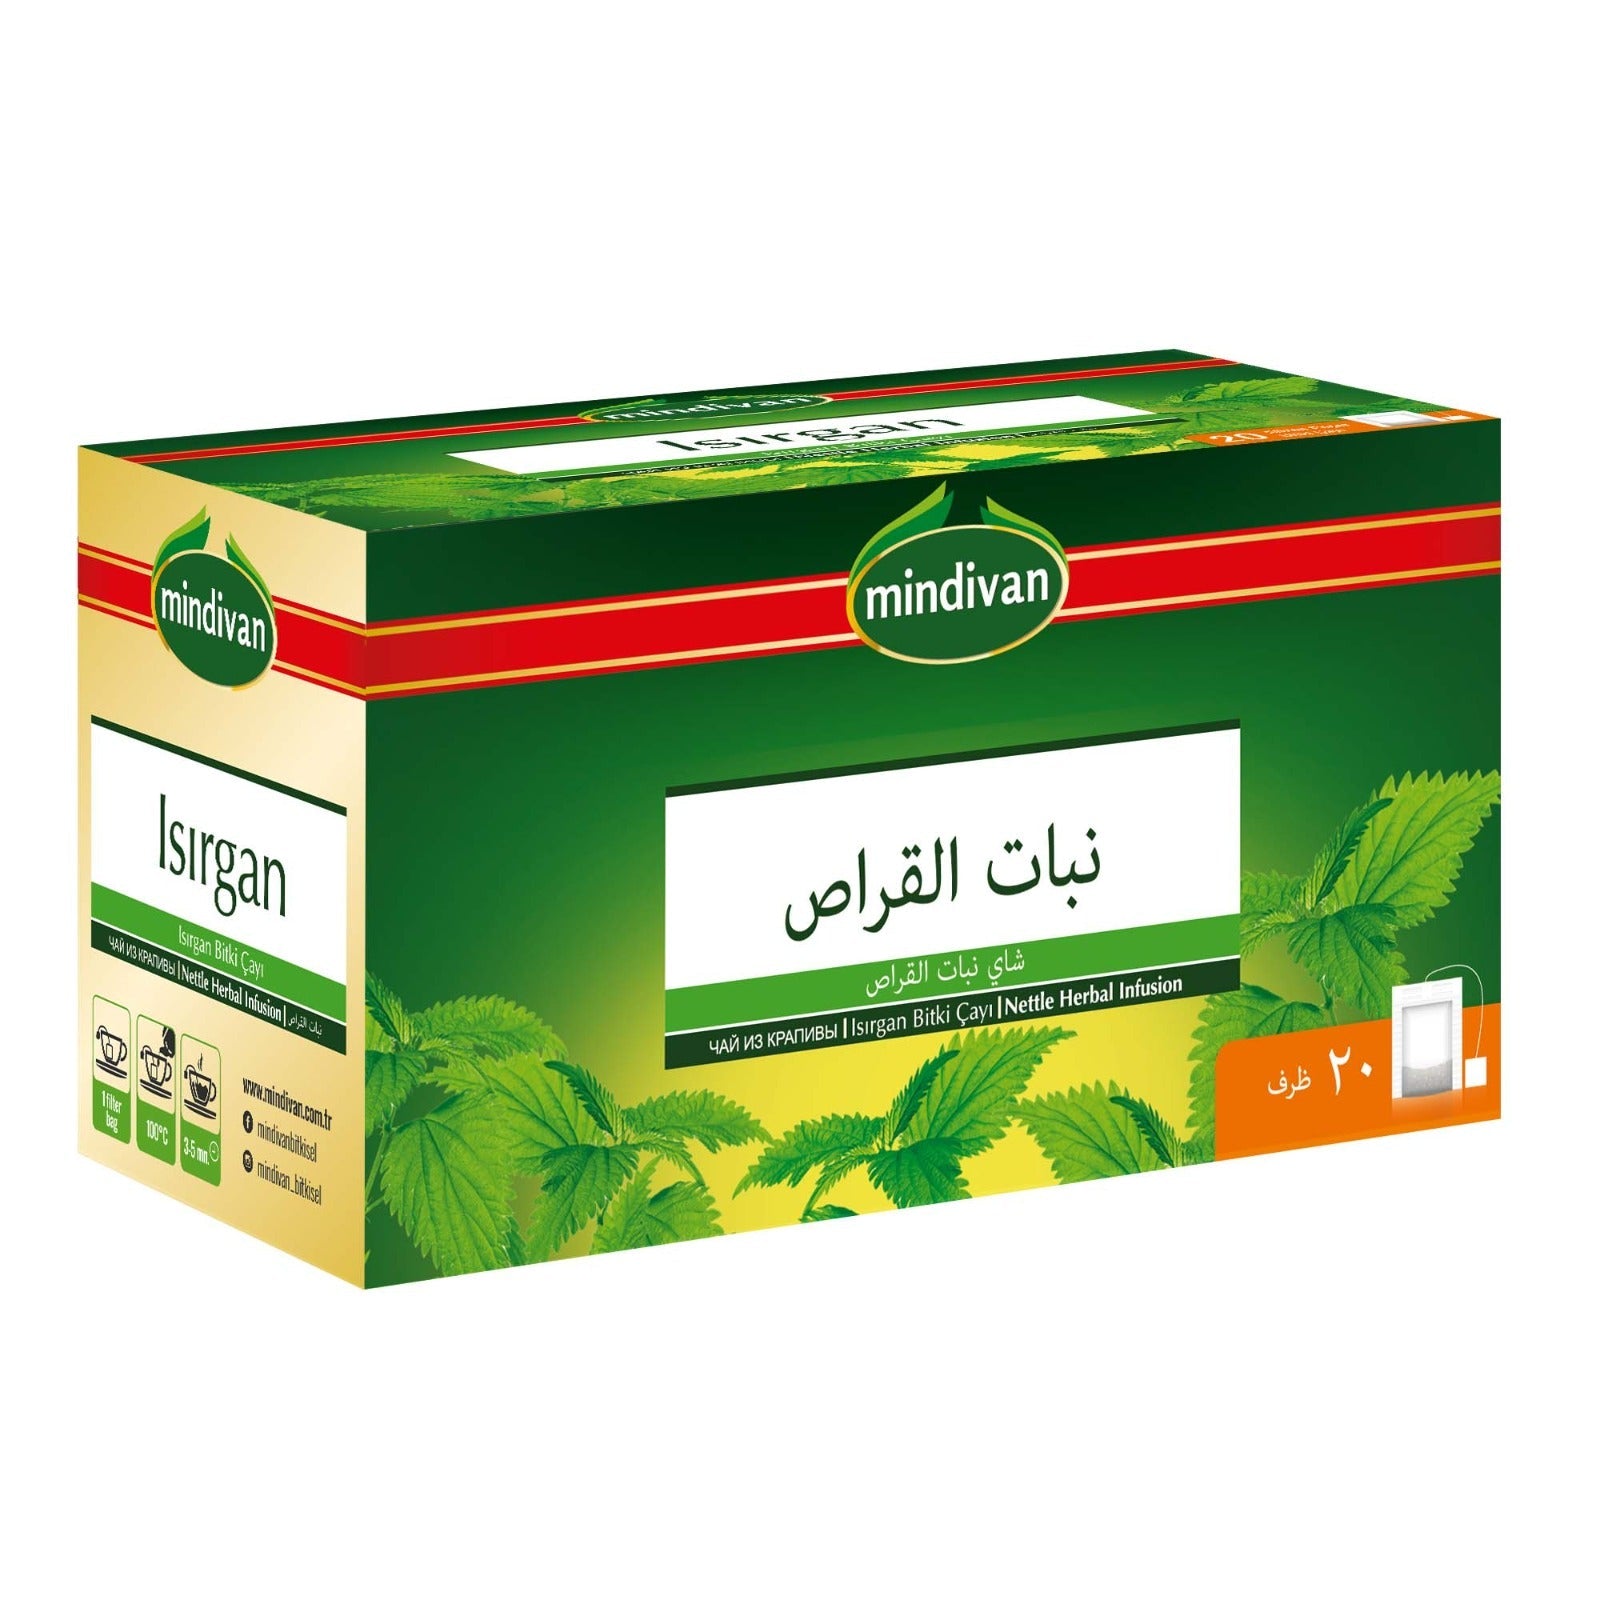 Mindivan Nettle Mixed Herbal Infusion 20 bags